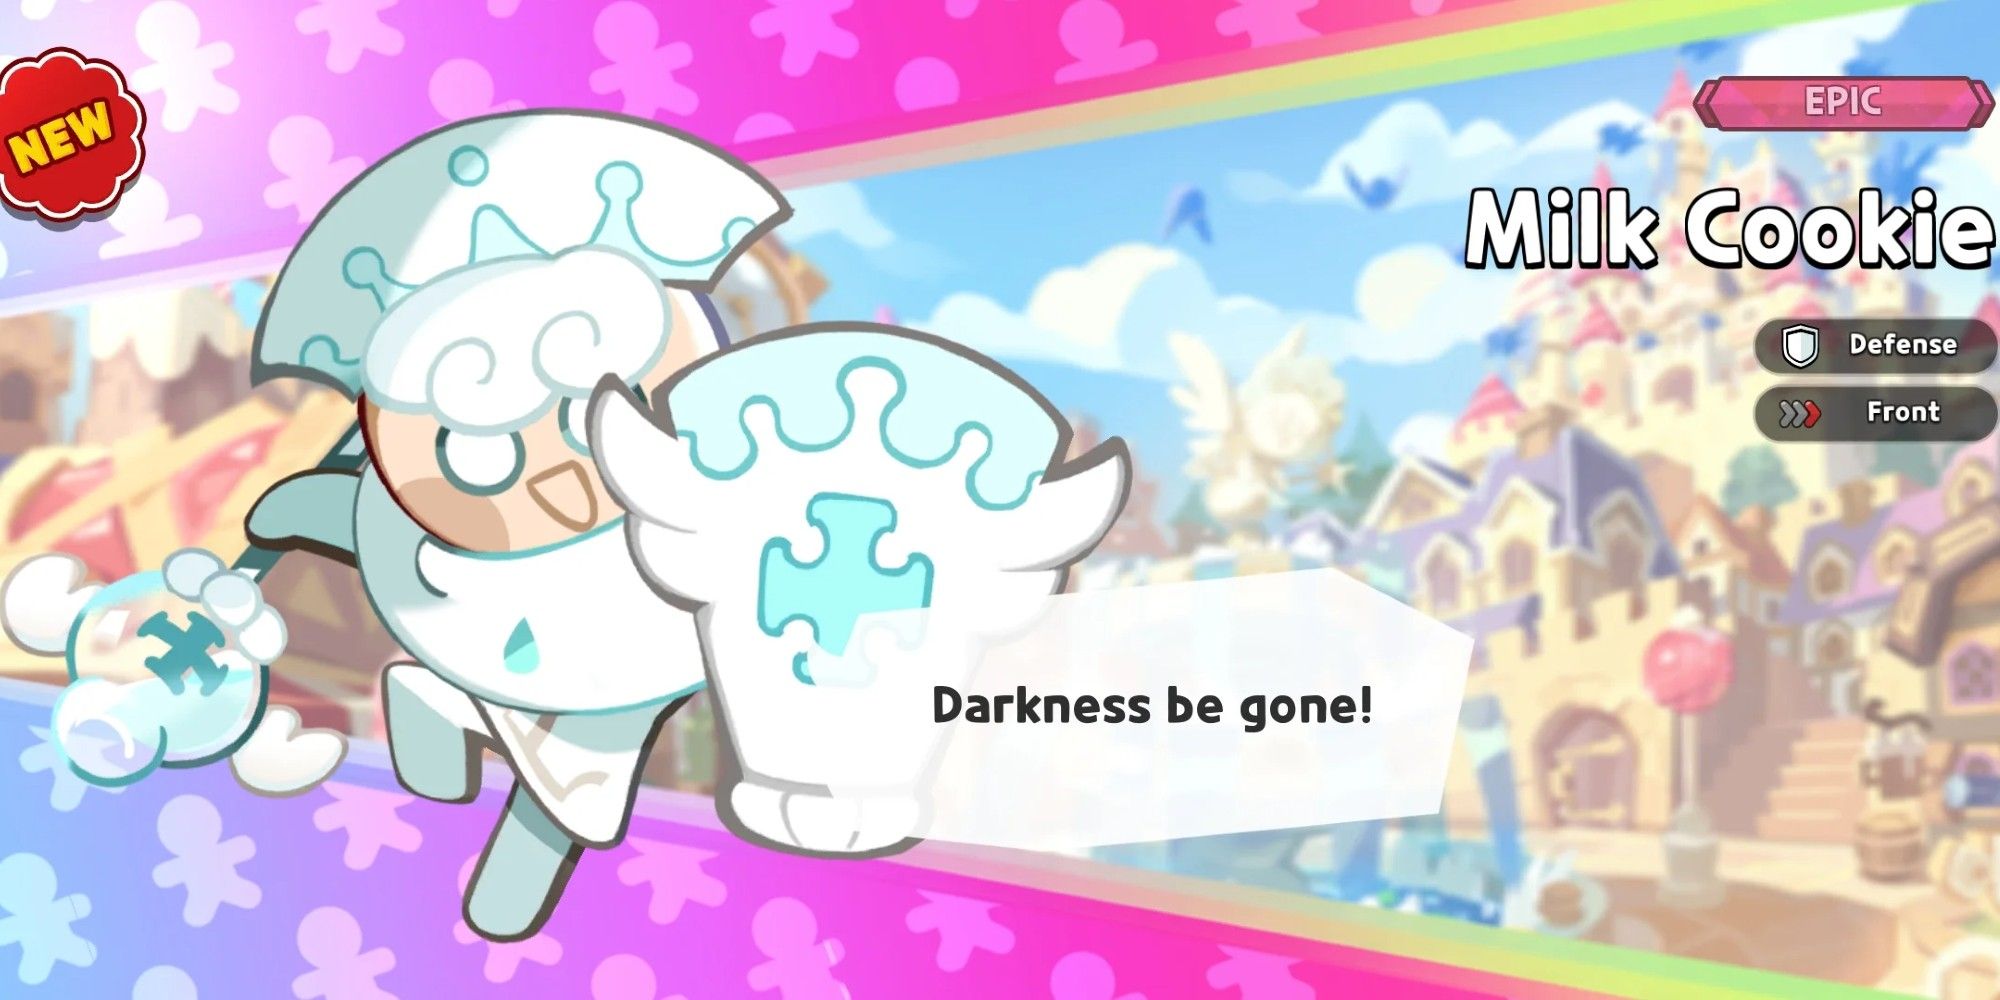 Milk Cookie wields her mighty milk shield to protect the party